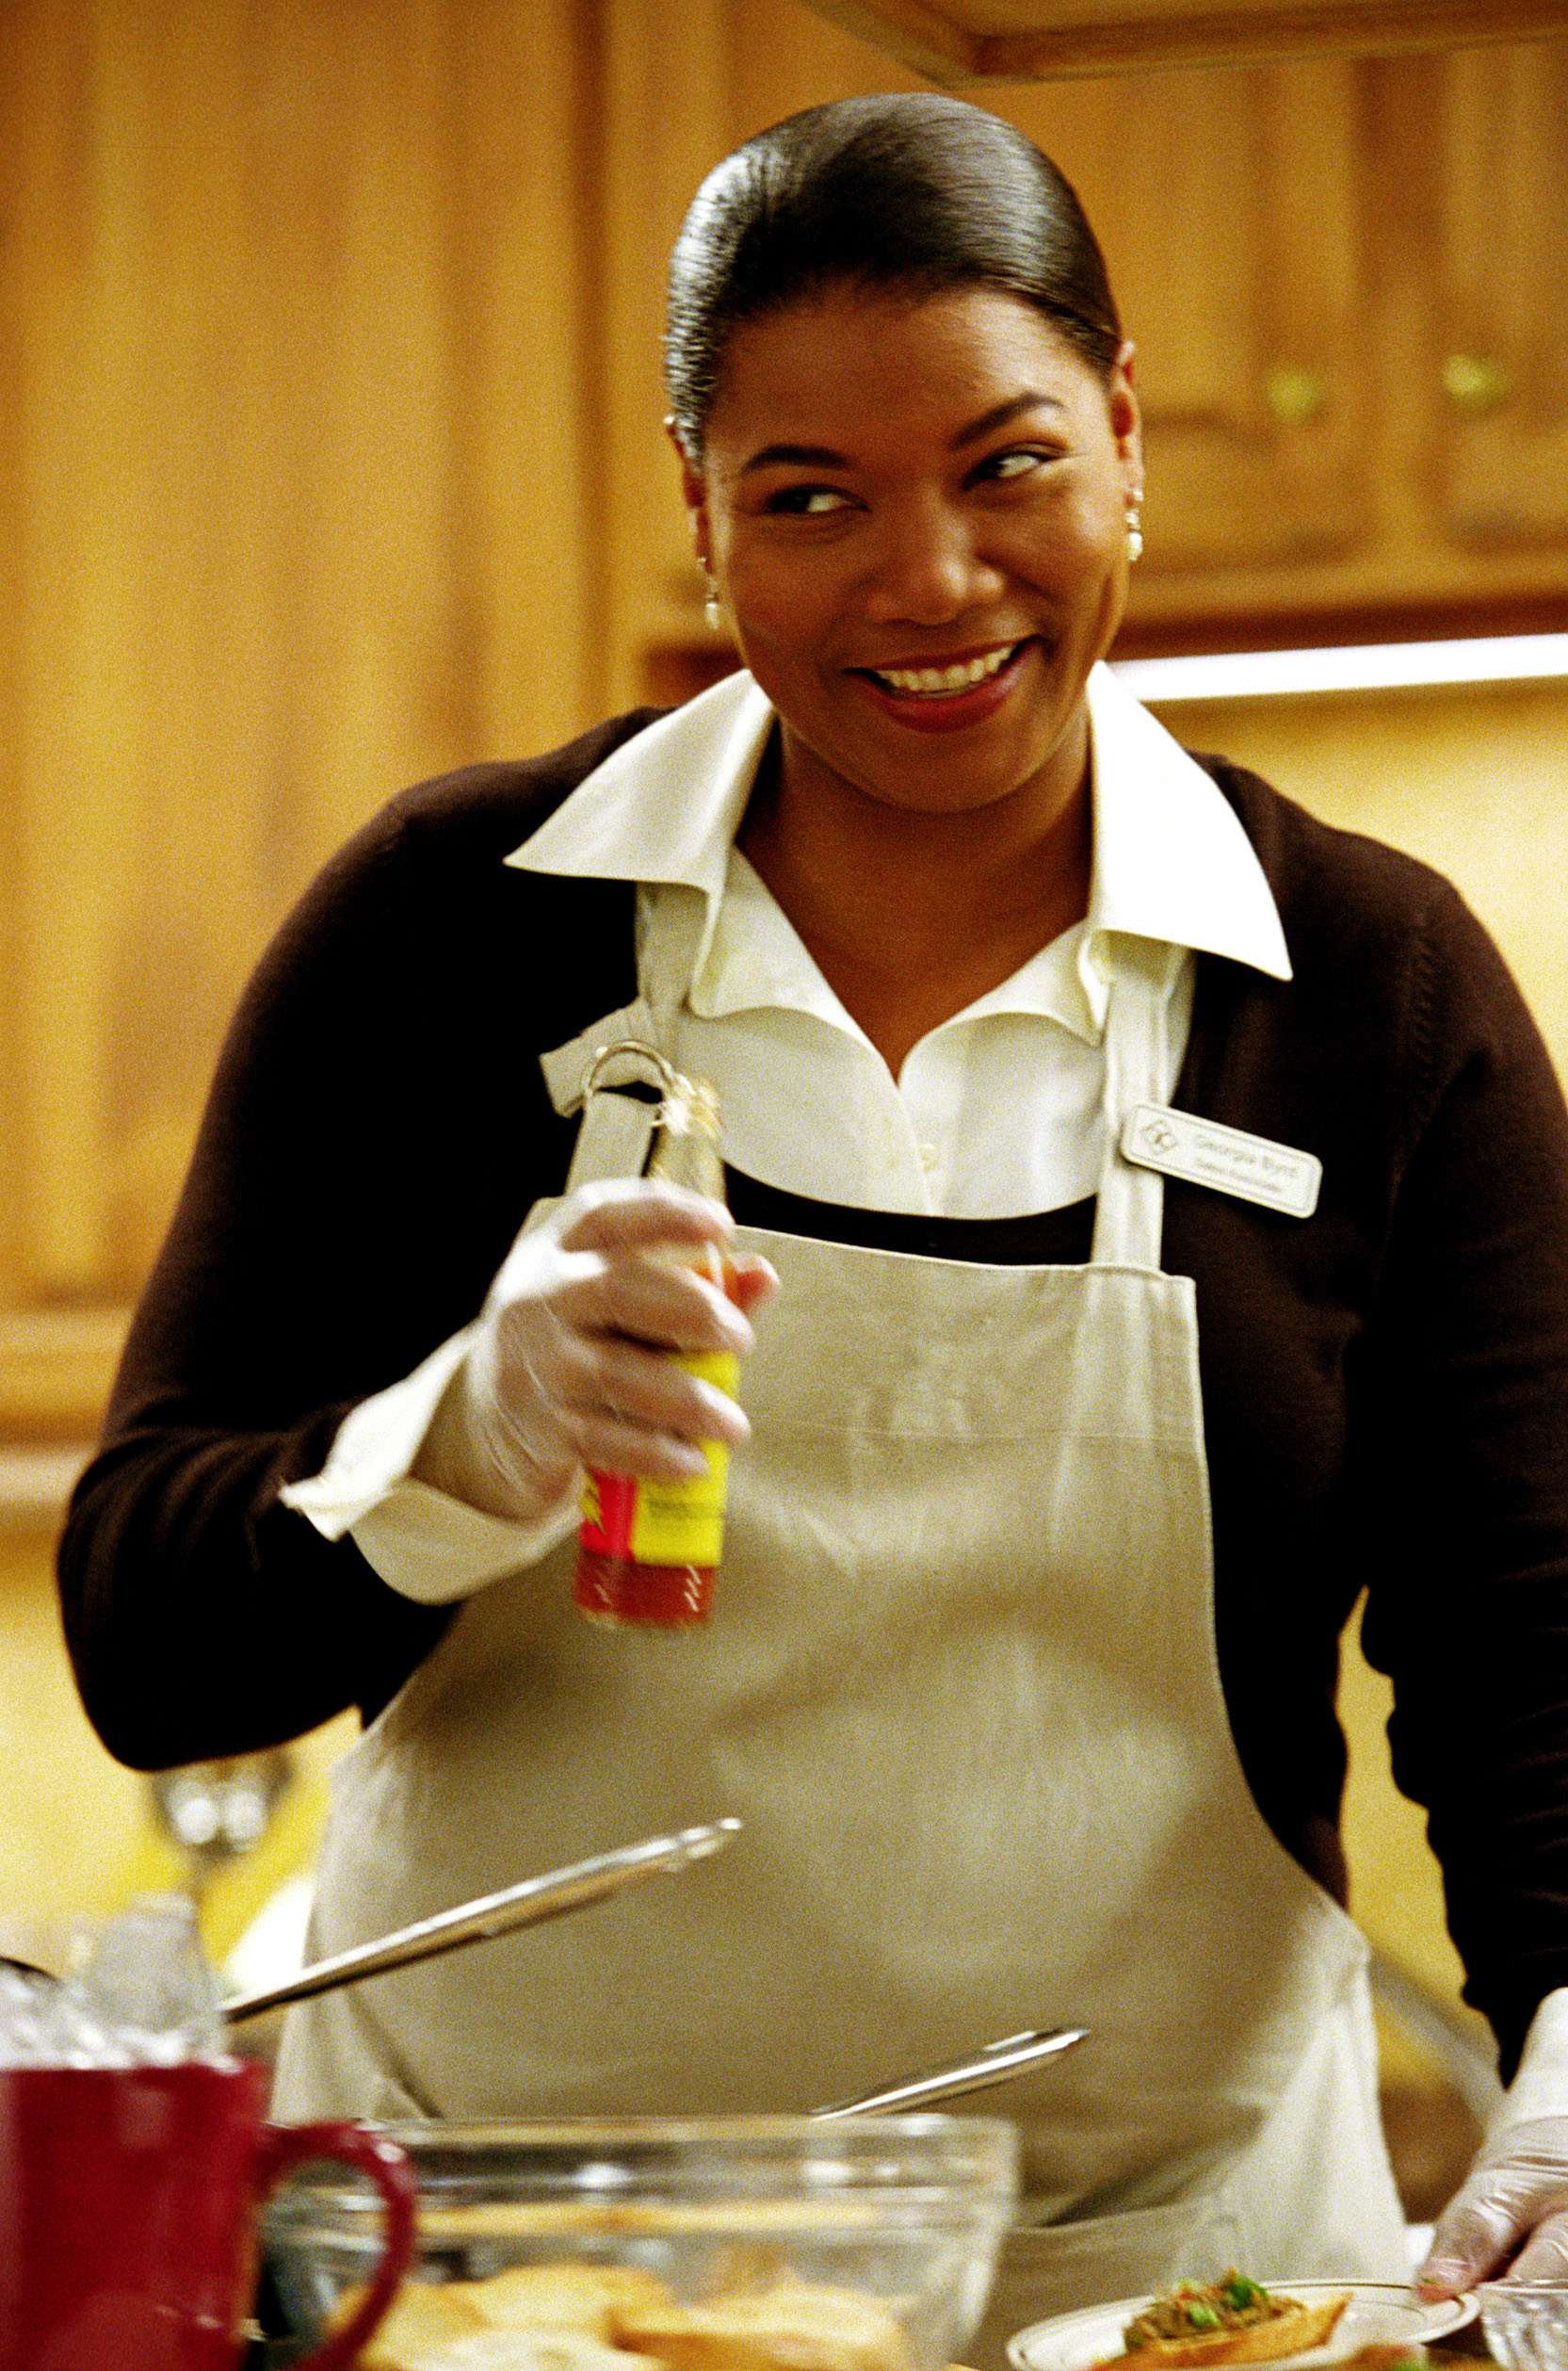 Latifah happily cooking a meal